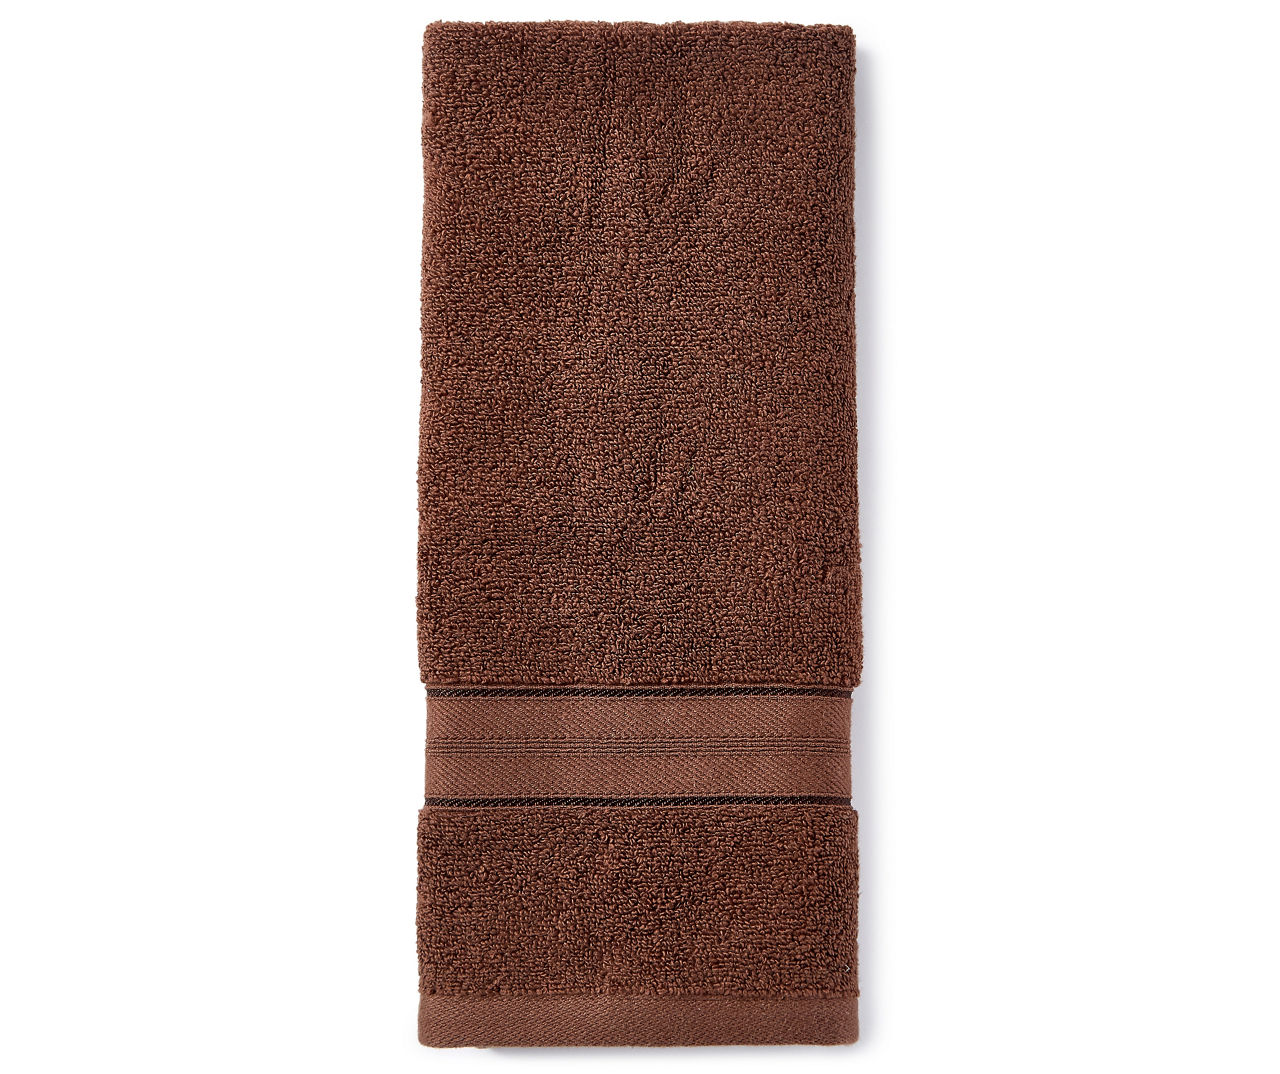 LC HAND TOWEL BROWN